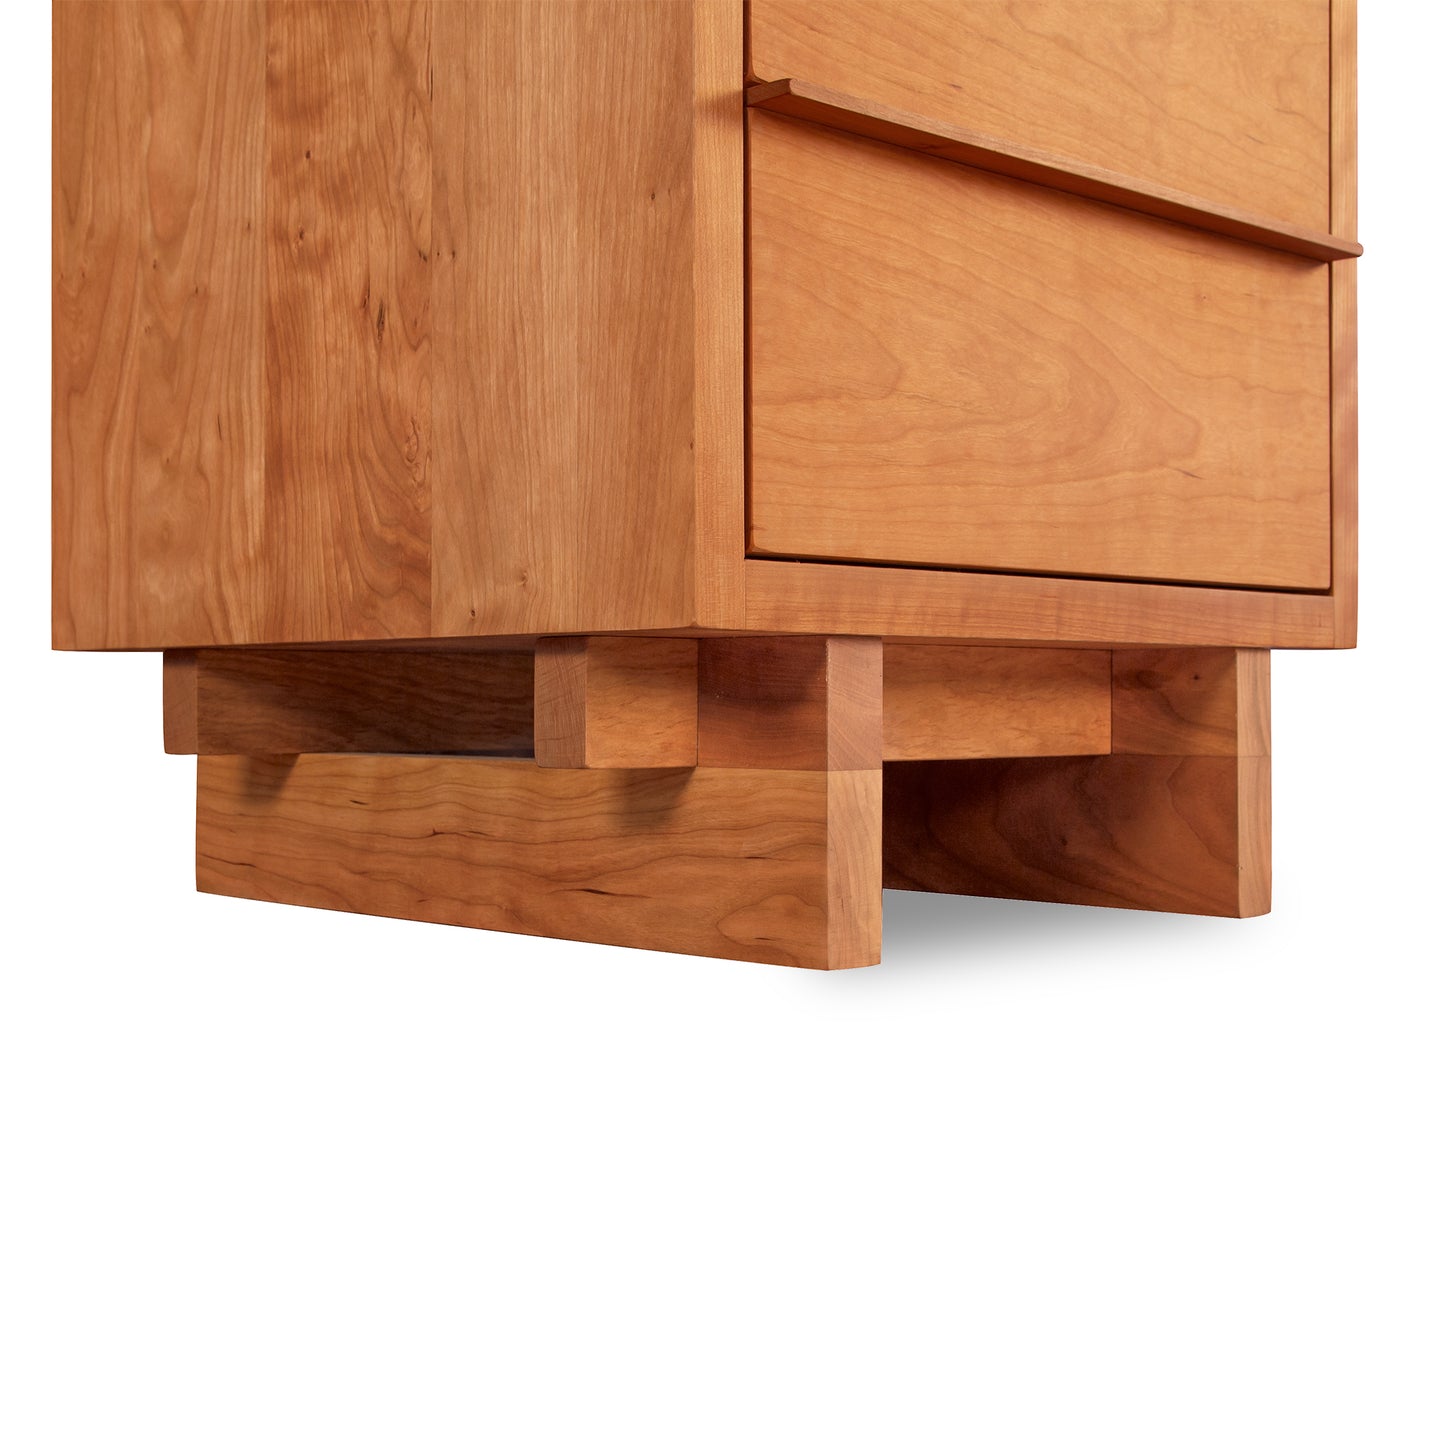 Modern design wooden Kipling 3-Drawer Nightstand with visible drawers and panel details, isolated on a white background, Vermont Furniture Designs.